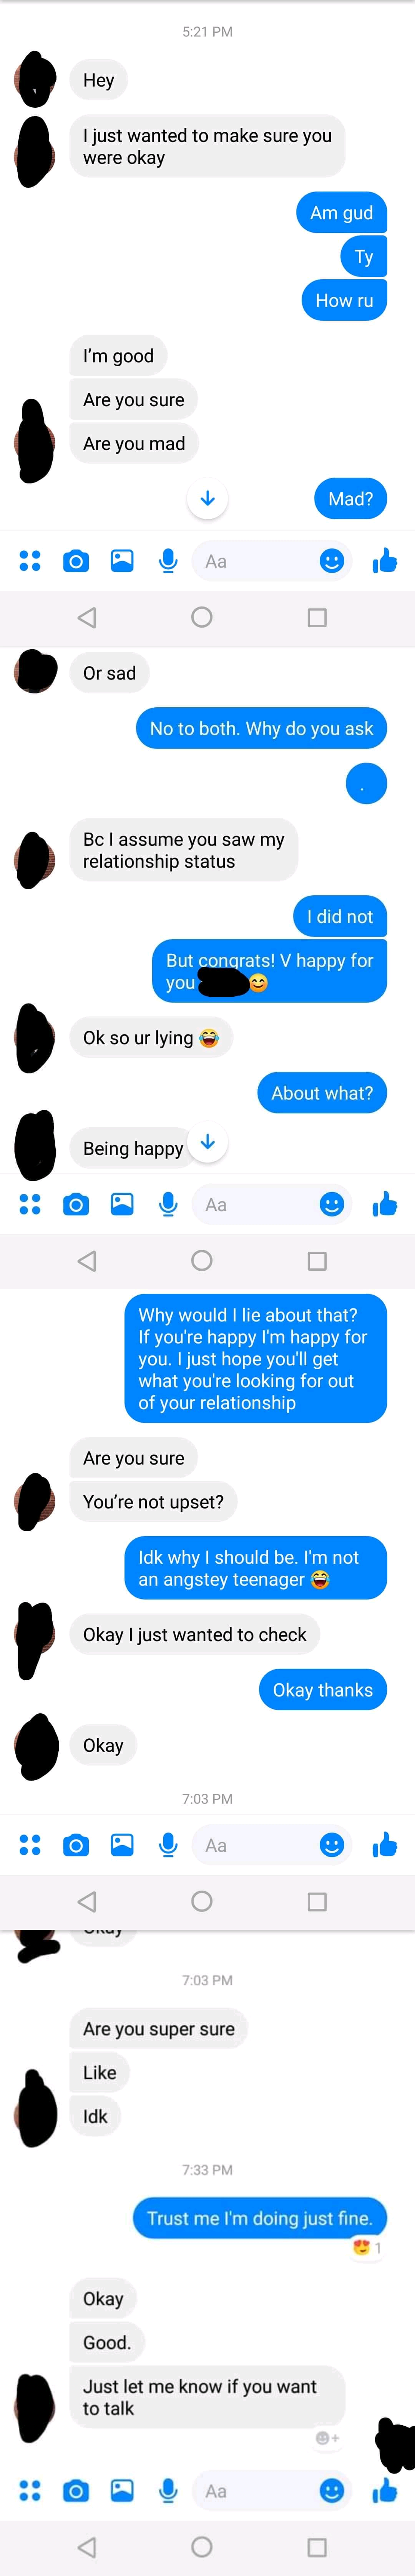 A person tells their ex they&#x27;re in a new relationship, the ex congratulates them, and the person repeatedly asks if their ex is mad or sad about it